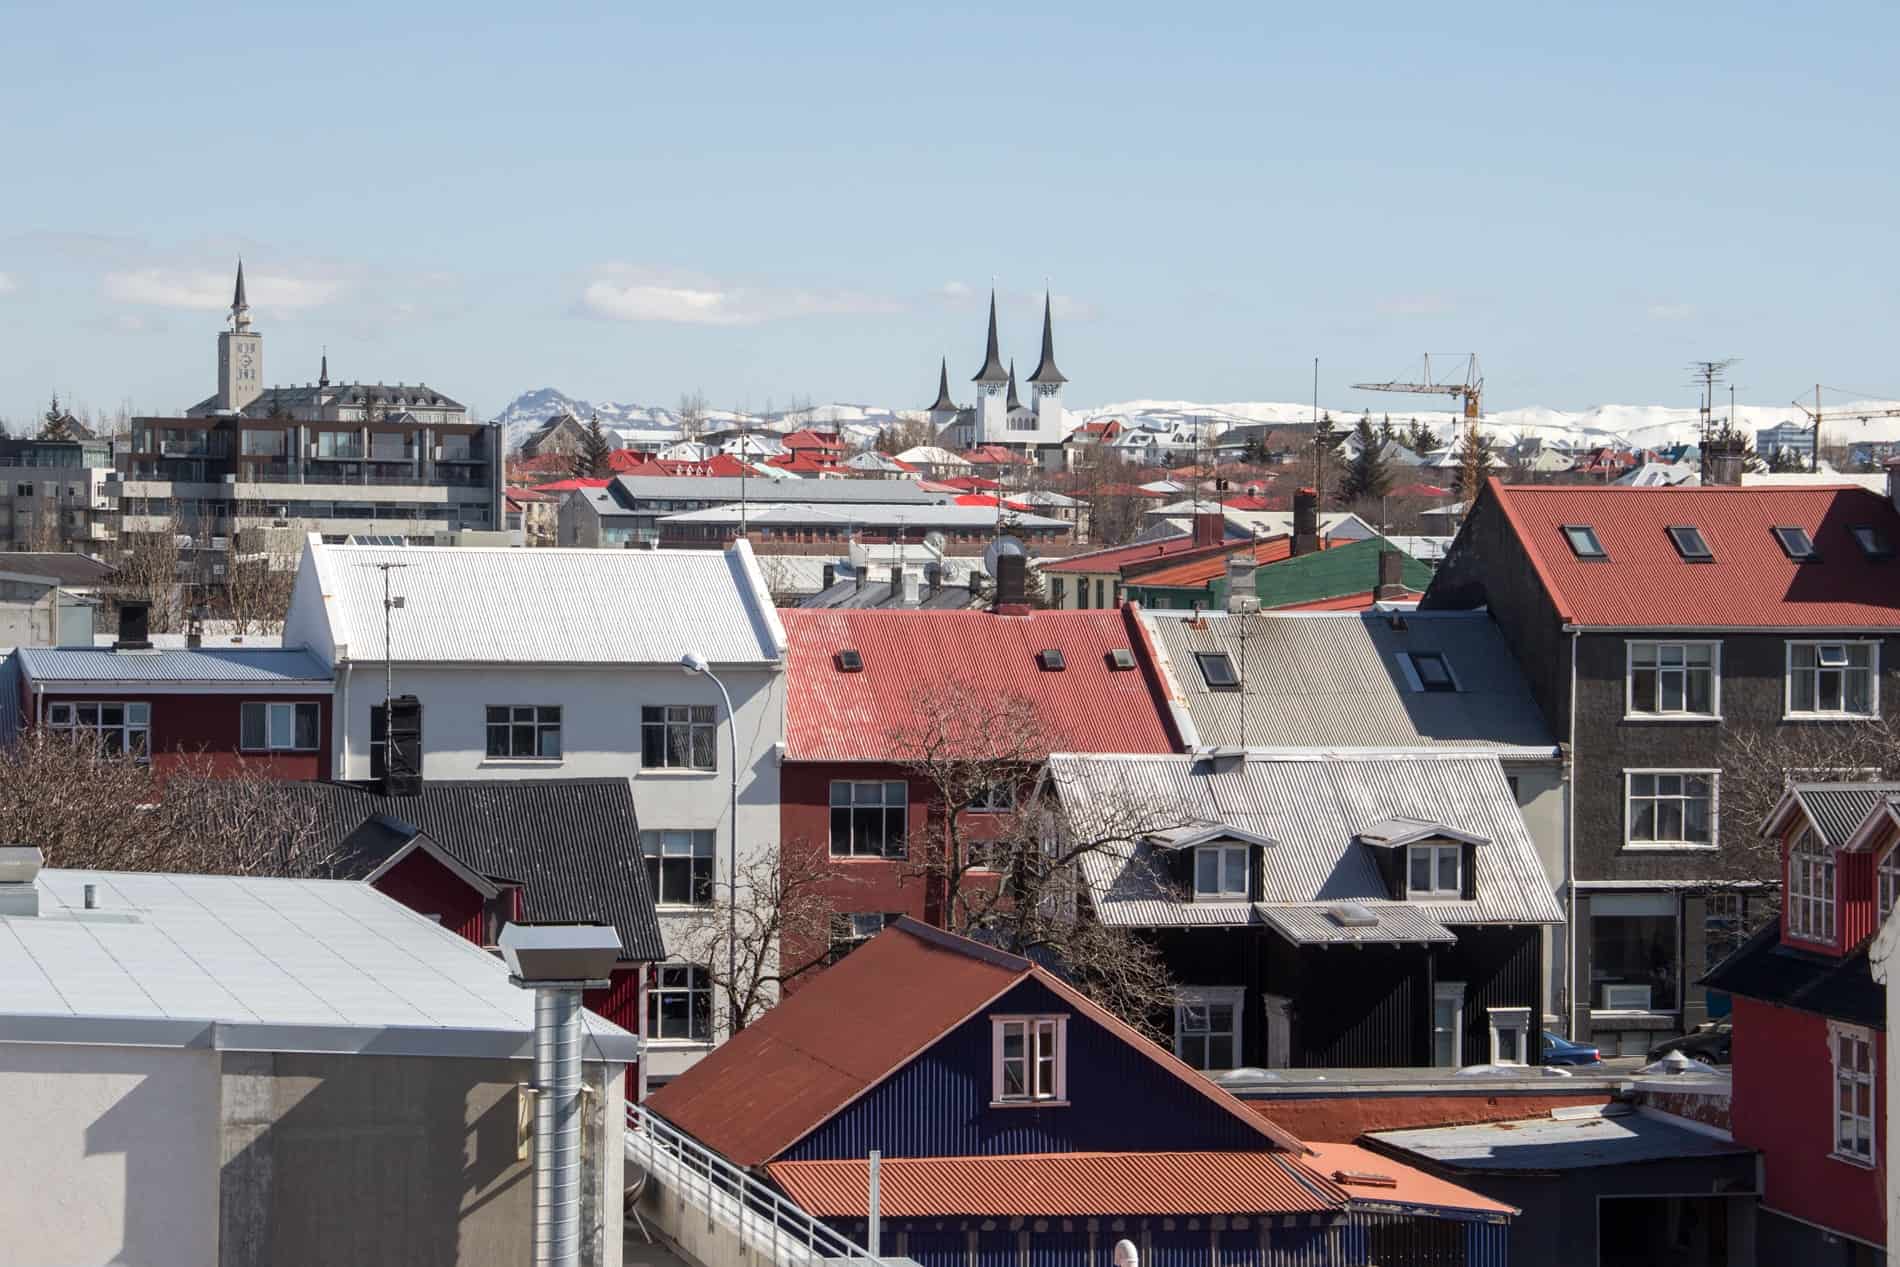 A cluster of houses painted in blue, red and green shades, and poking church spires in the city of Reykjavik, Iceland. 